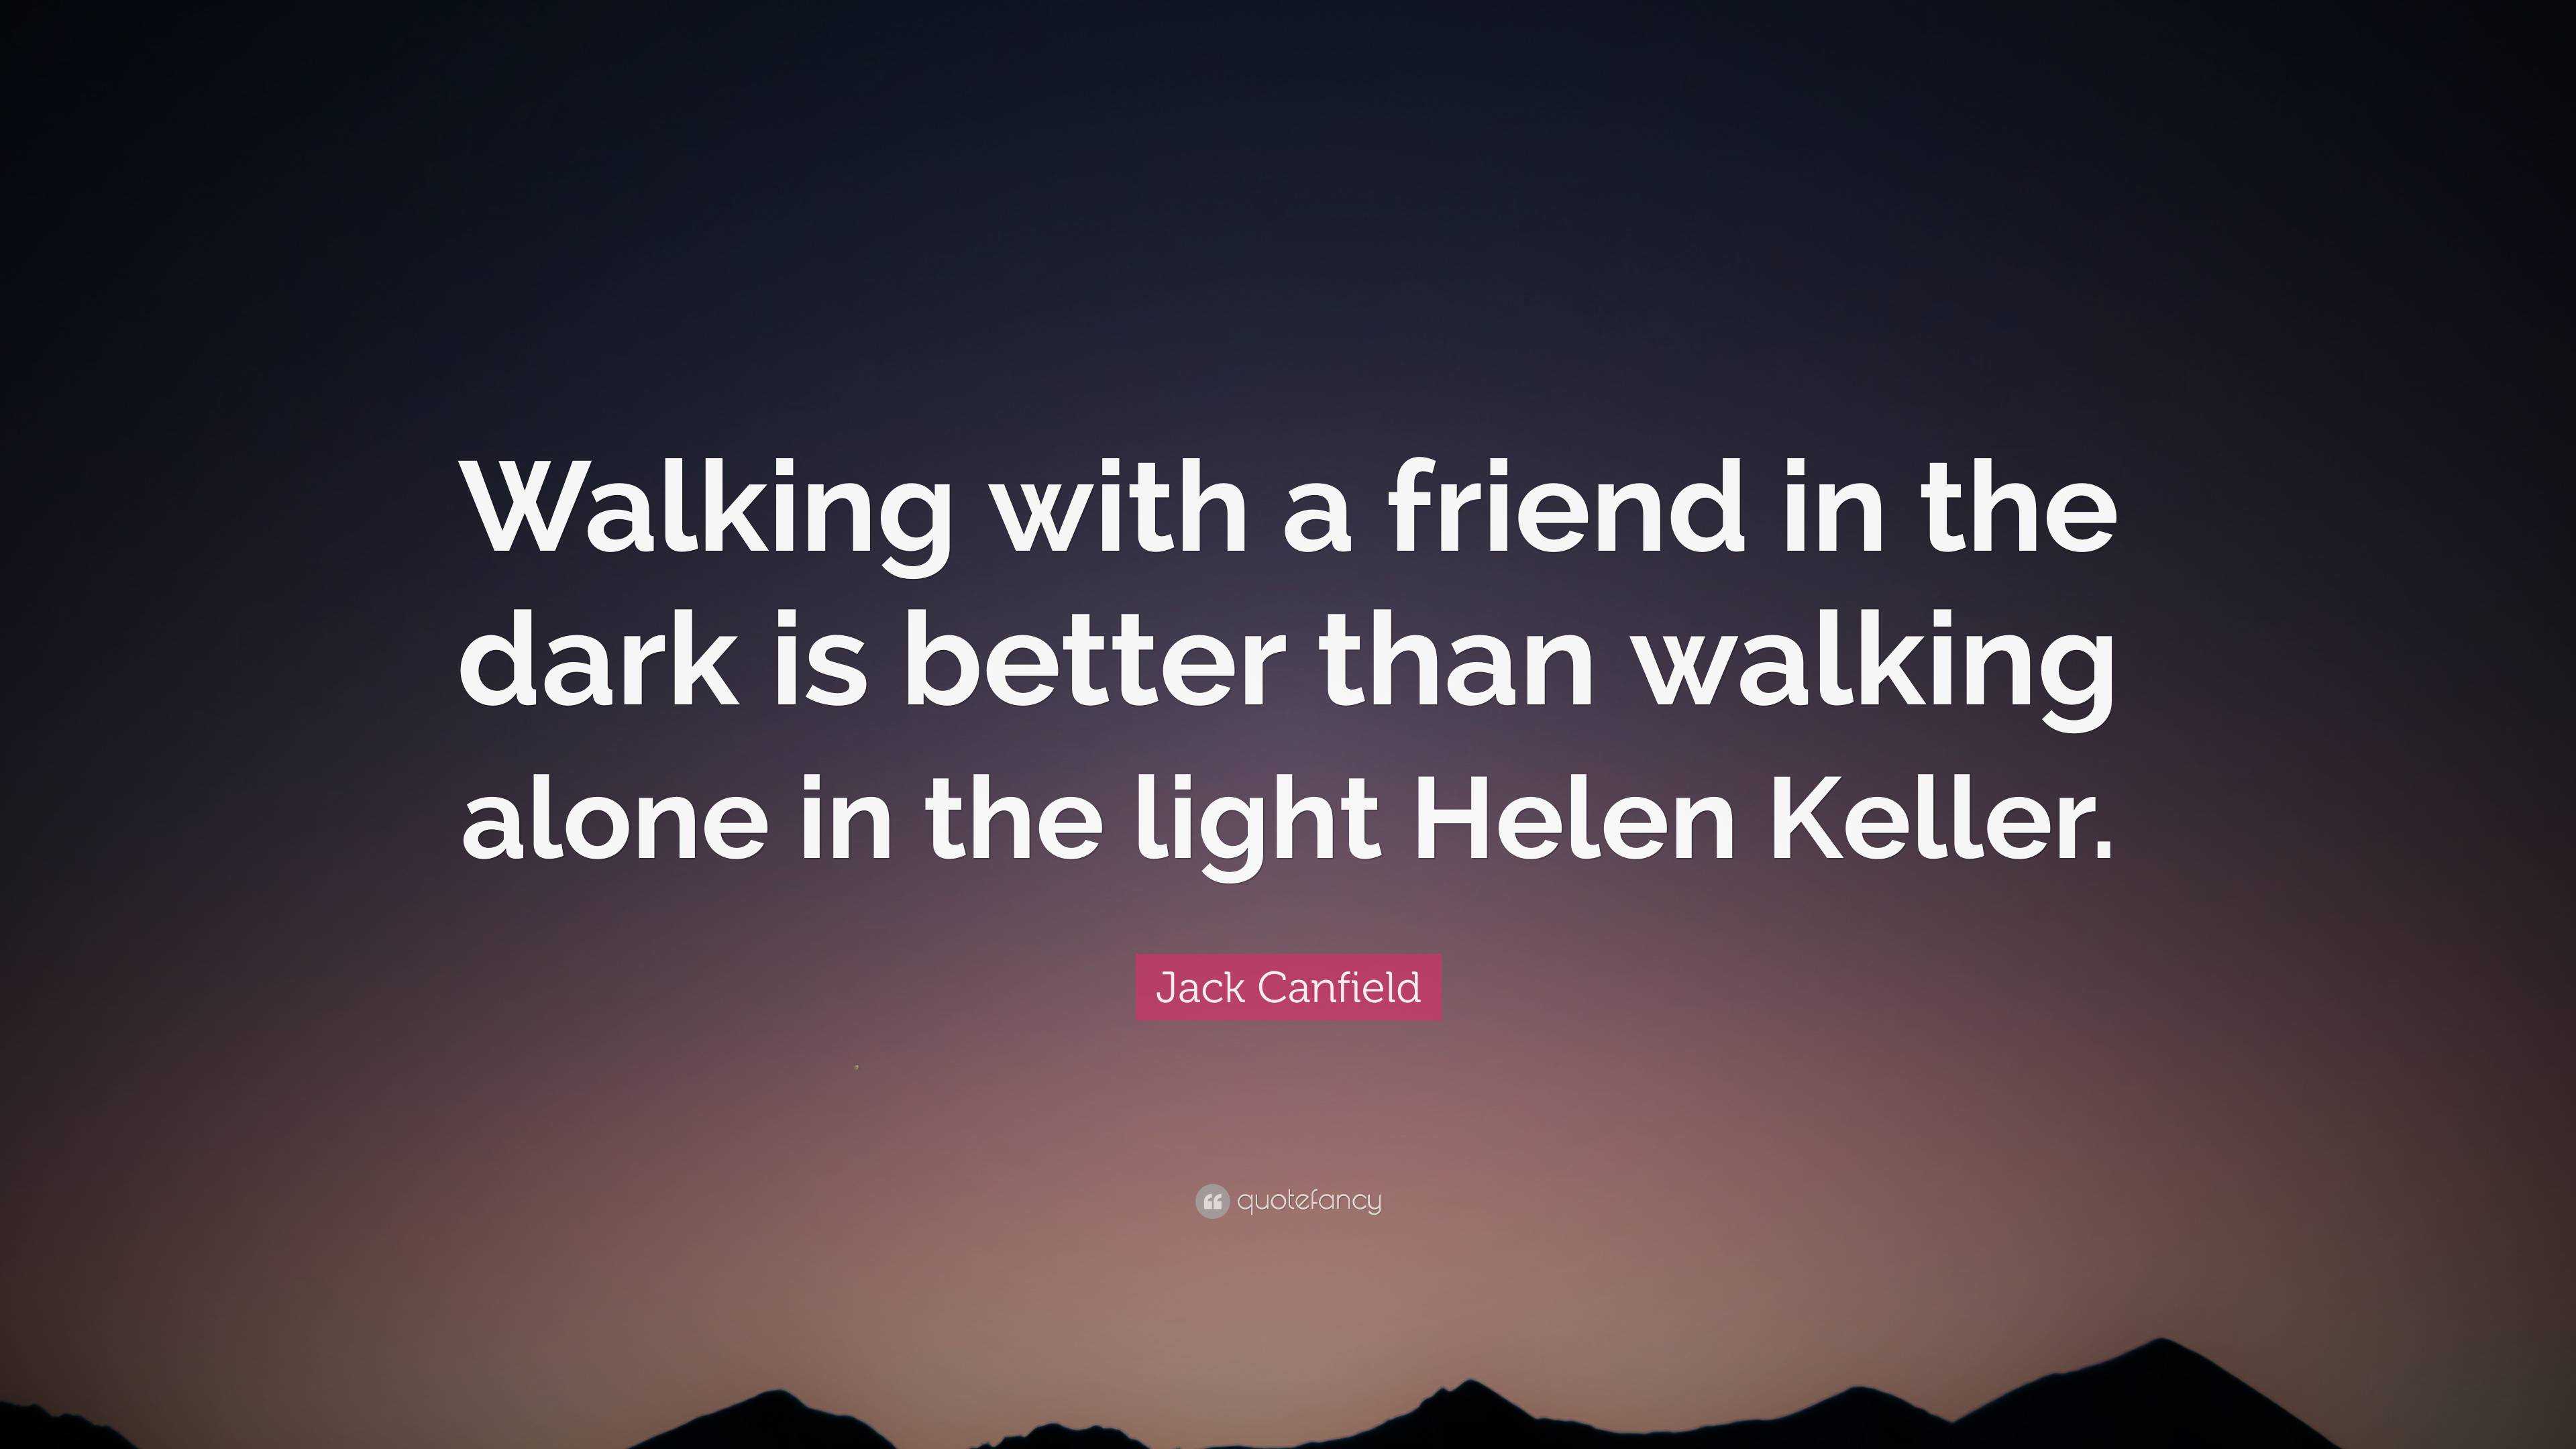 Jack Canfield Quote: “Walking with a friend in the dark is better than ...